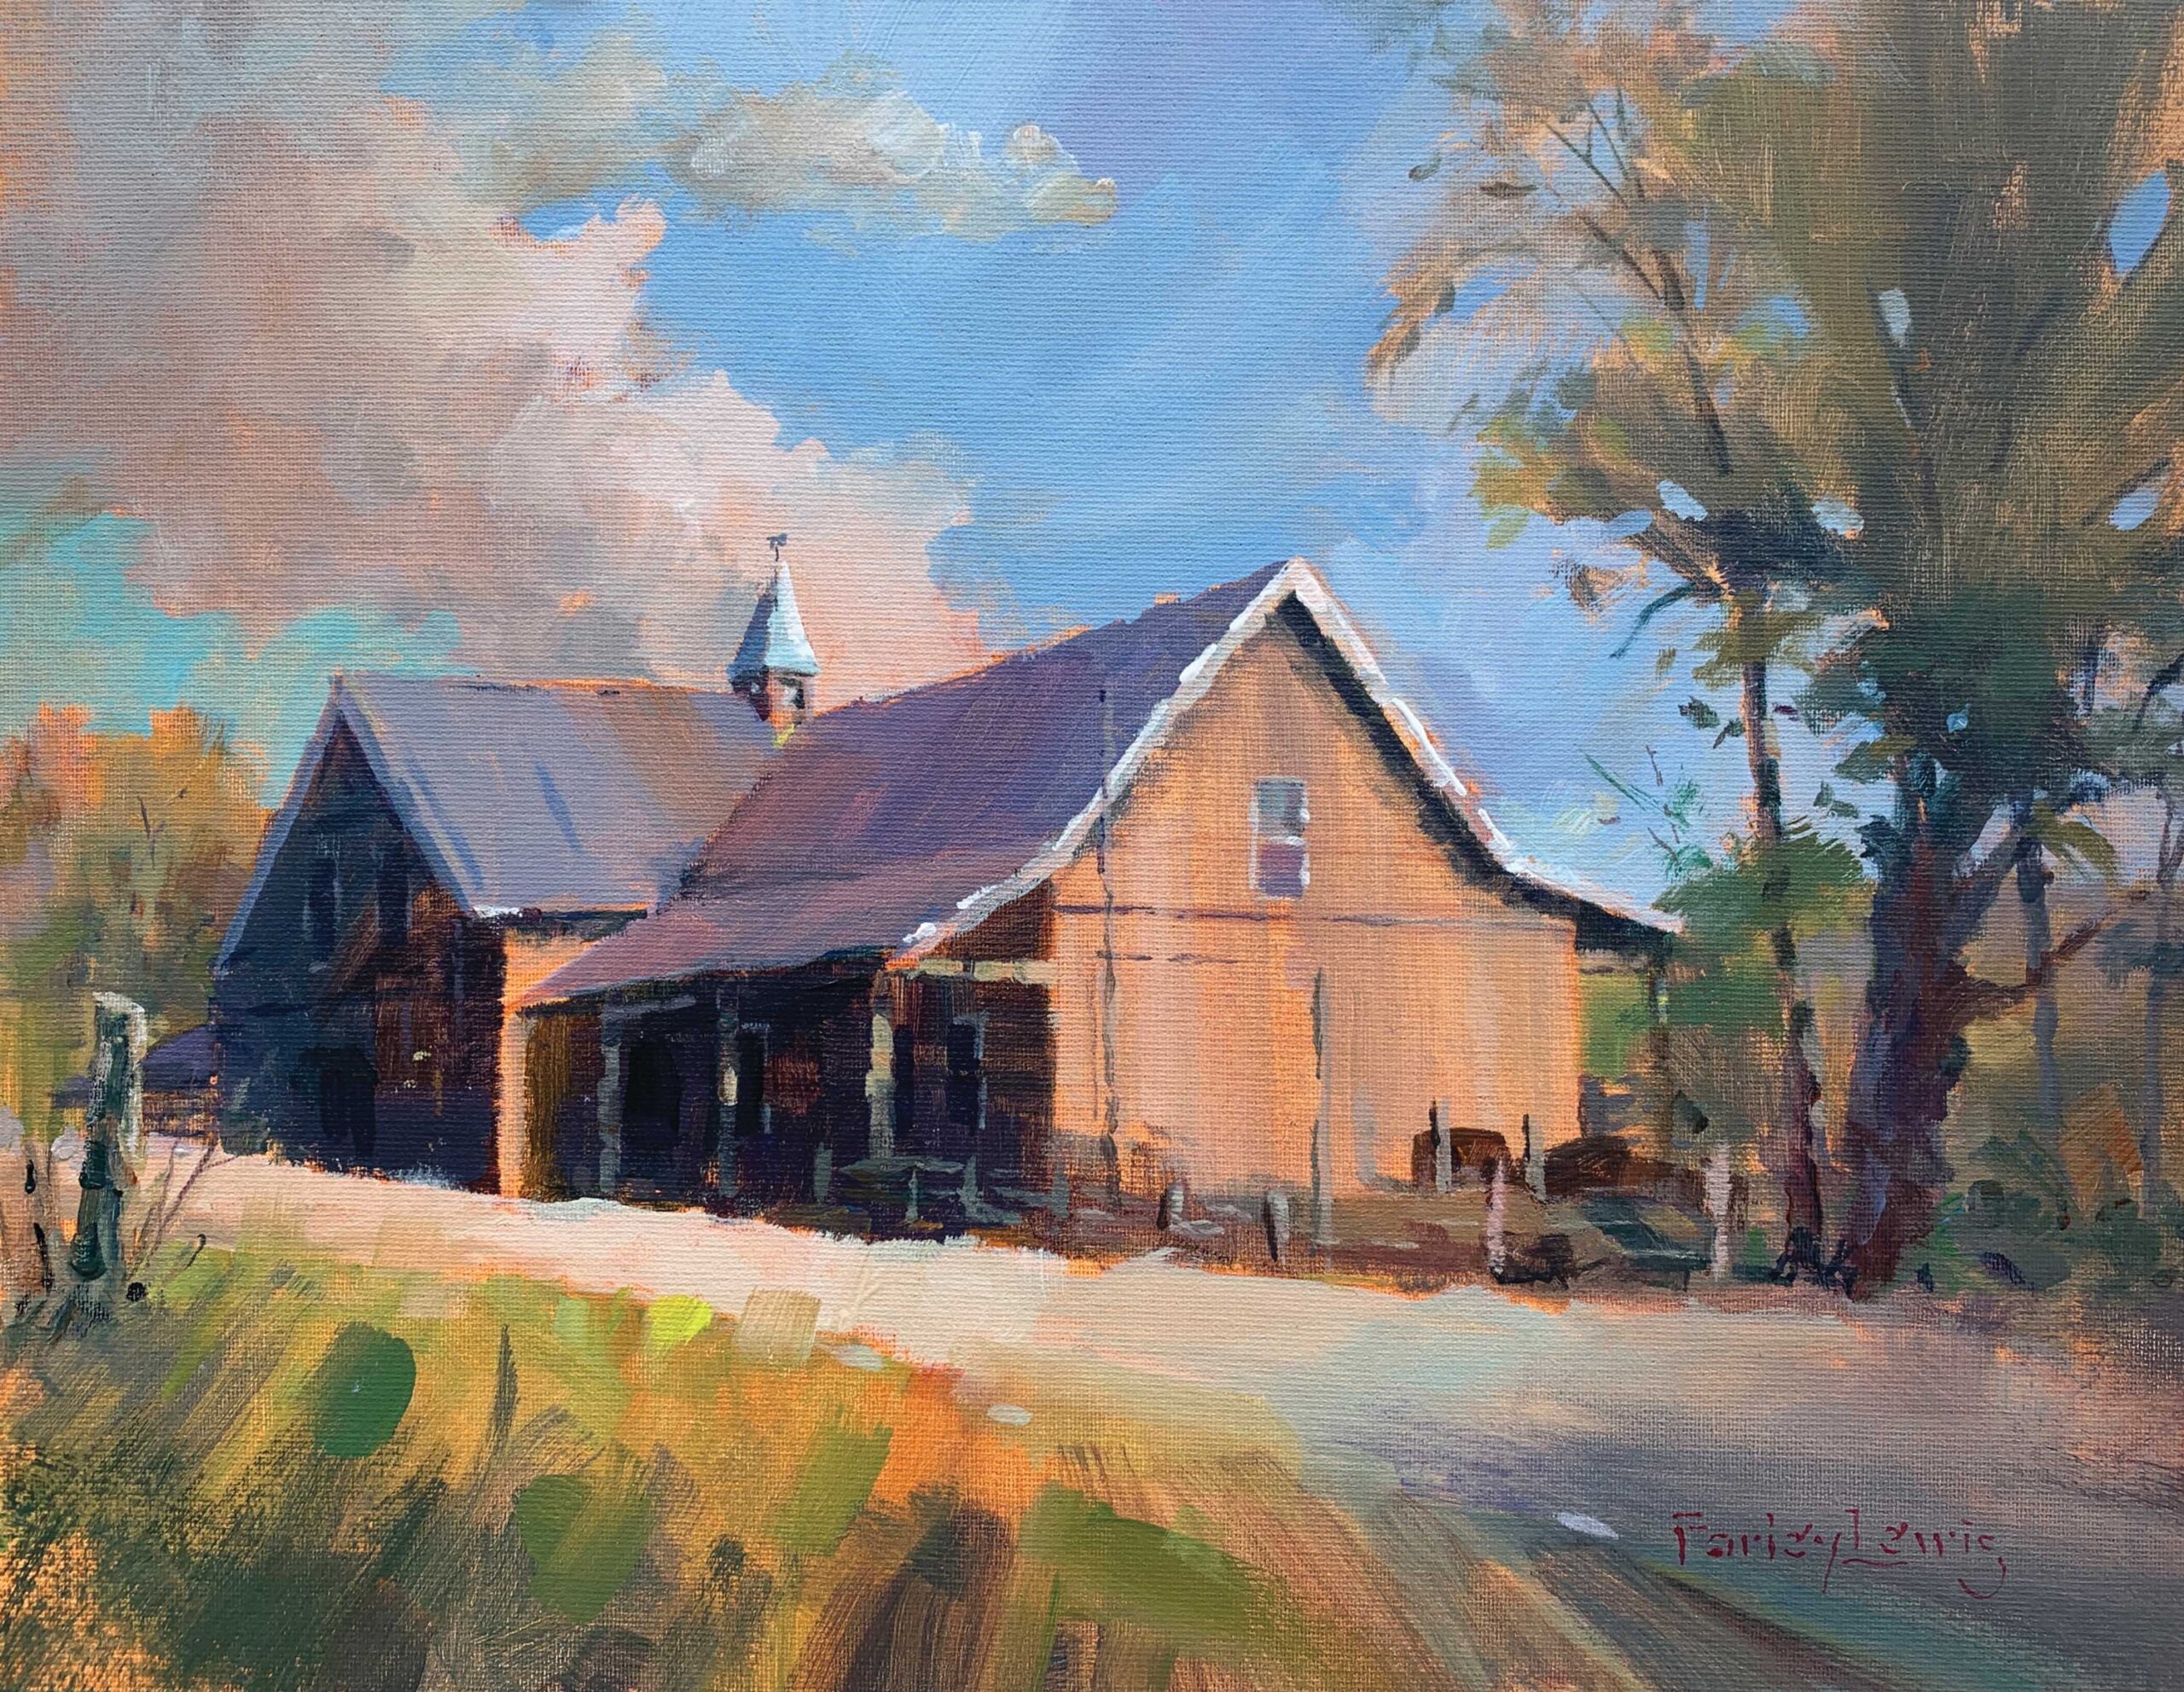 Farley Lewis, “Last Brush of Autumn,” 2021, acrylic, 11 x 14 in., Private collection, Plein air